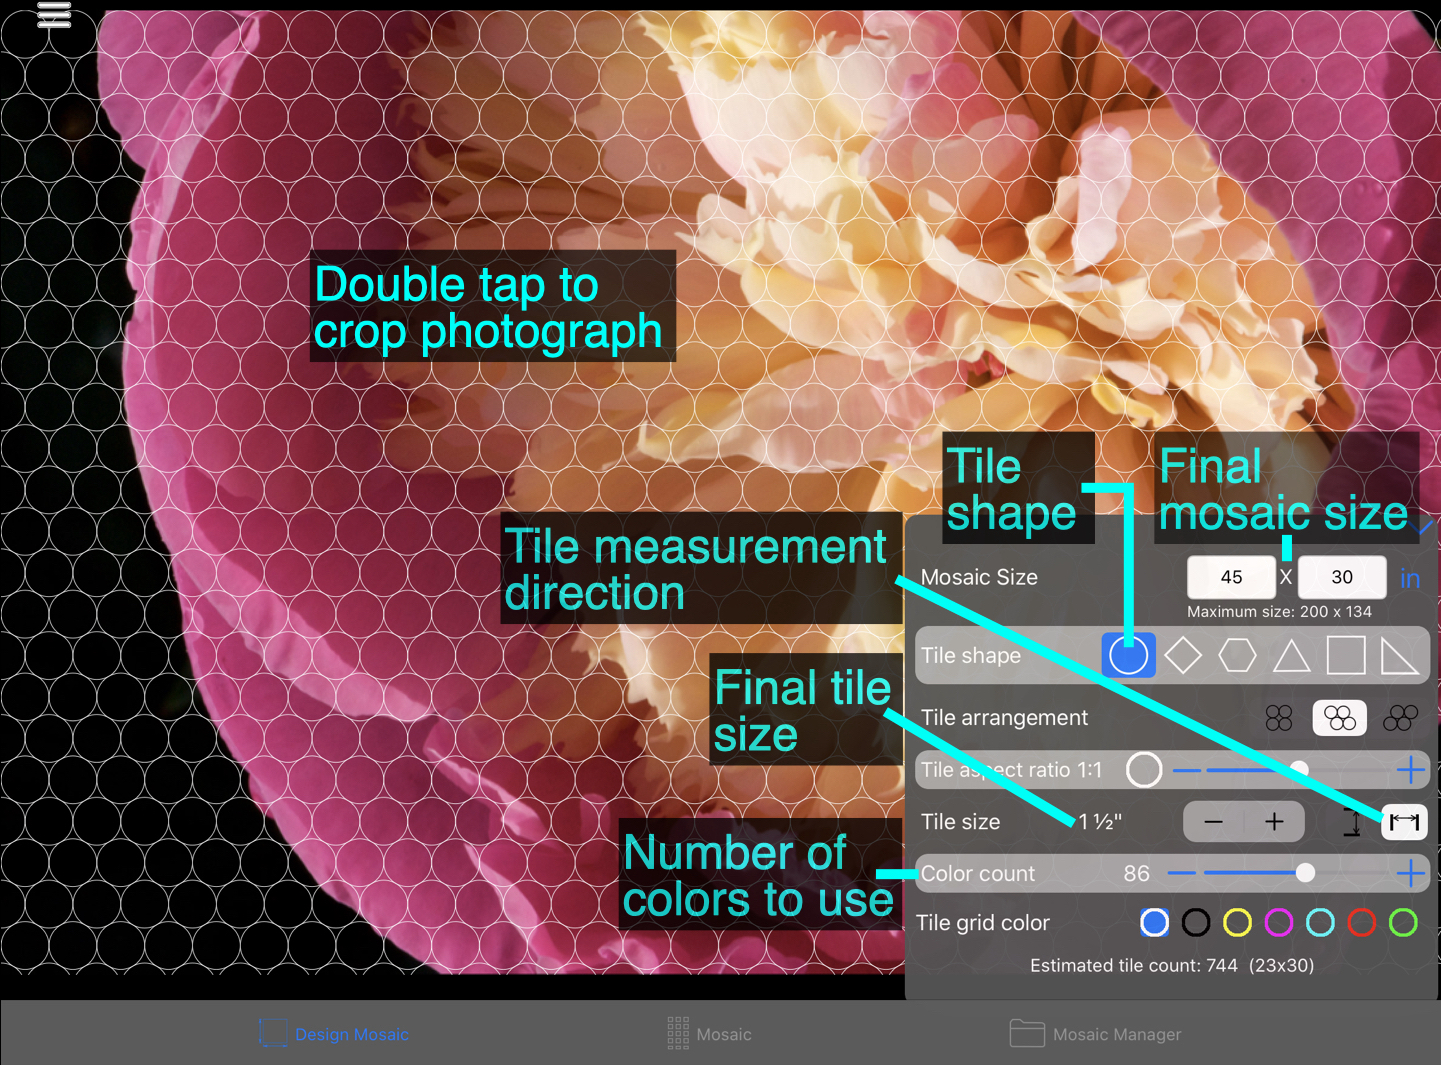 Annotated image of design mosaic tab